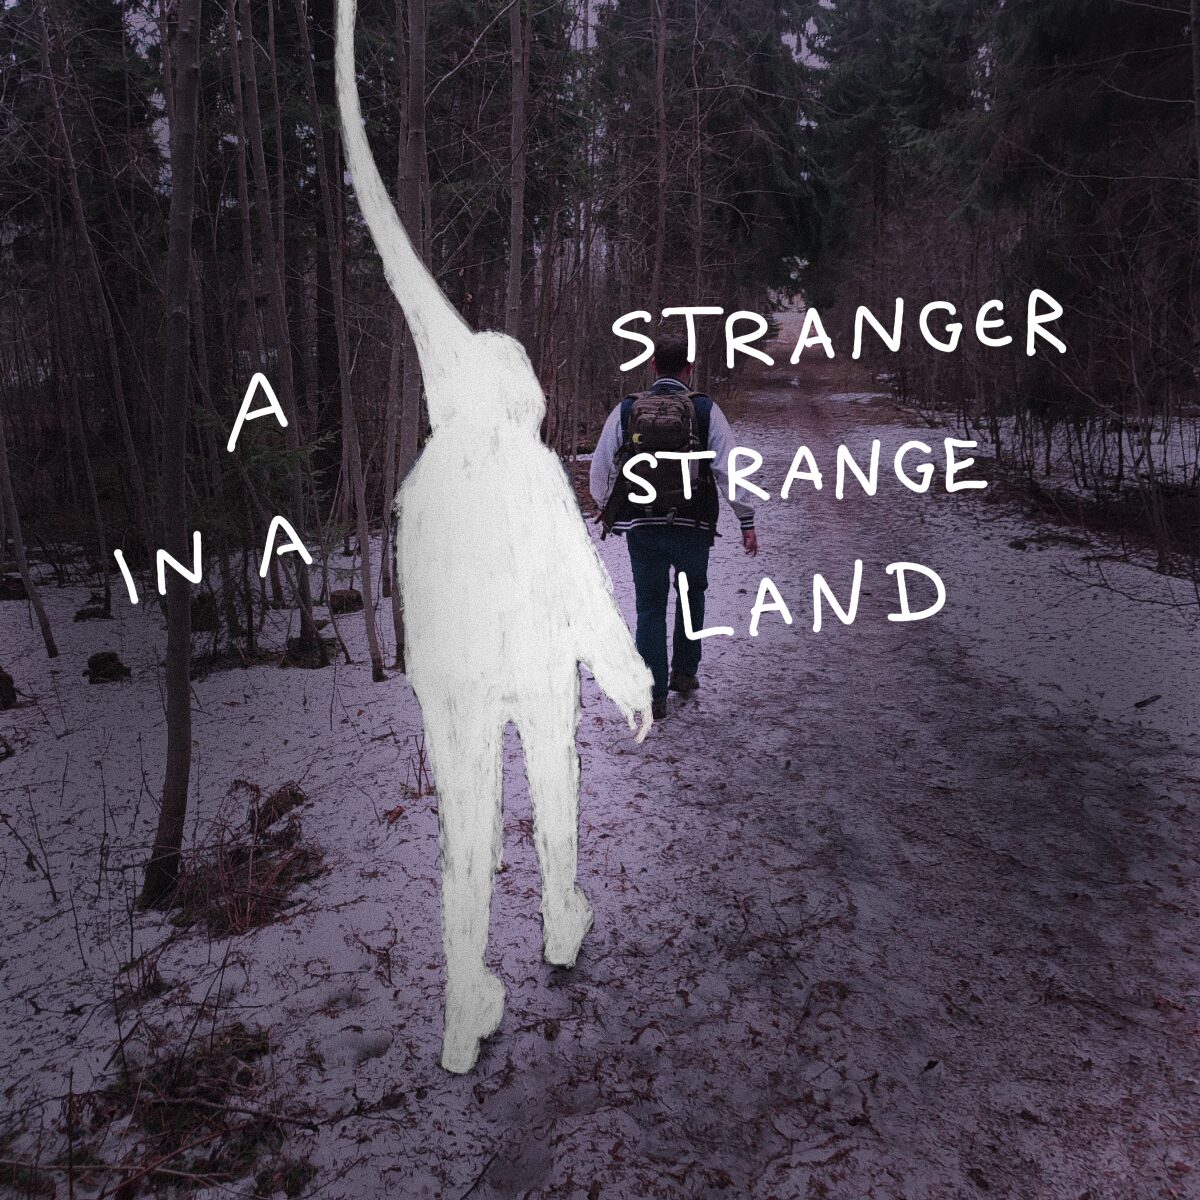 Text in picture: A stranger in a strange land.